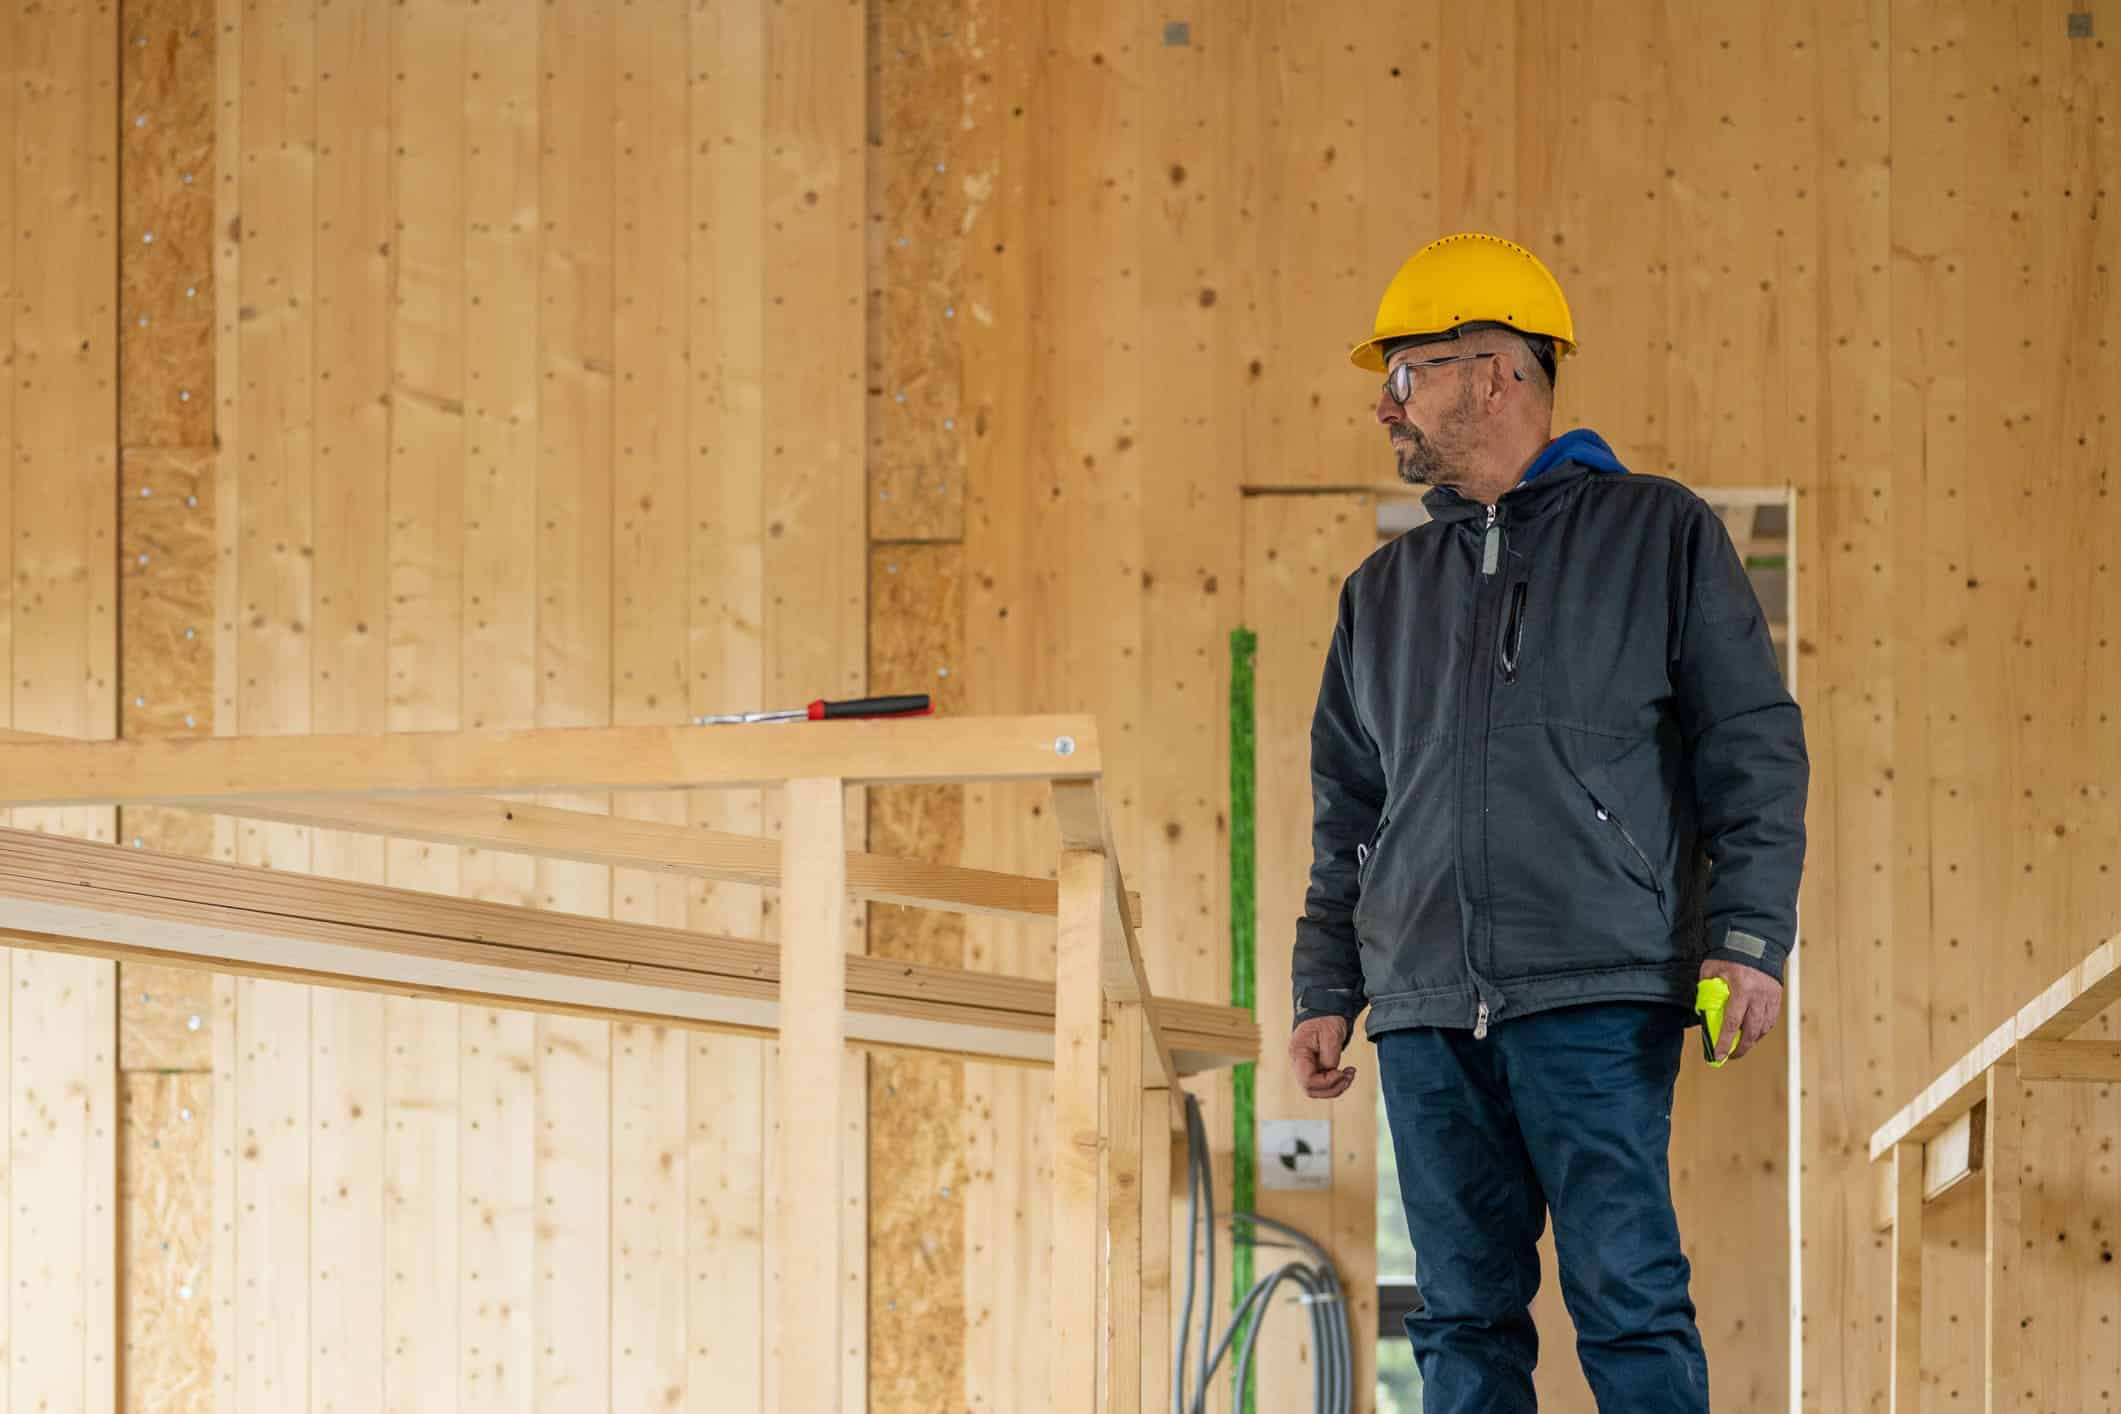 Read on to learn how to become a general contractor.